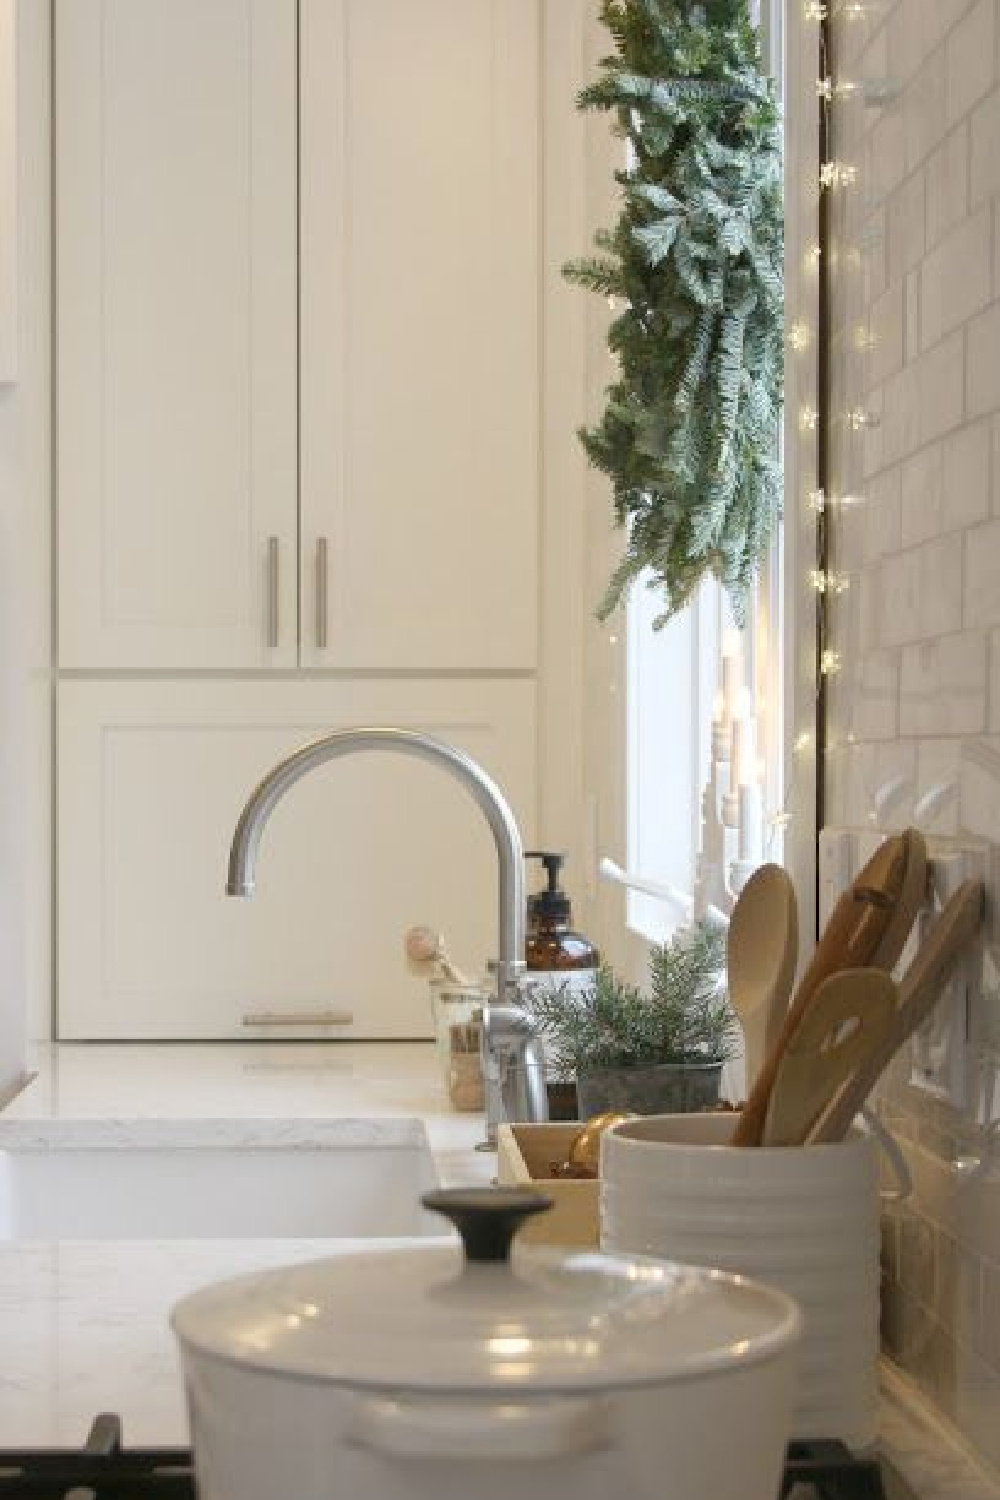 White Christmas decor - in my simple kitchen with fresh fir wreath above farm sink and simple delicate fairy lights. #hellolovelystudio #christmasdecor